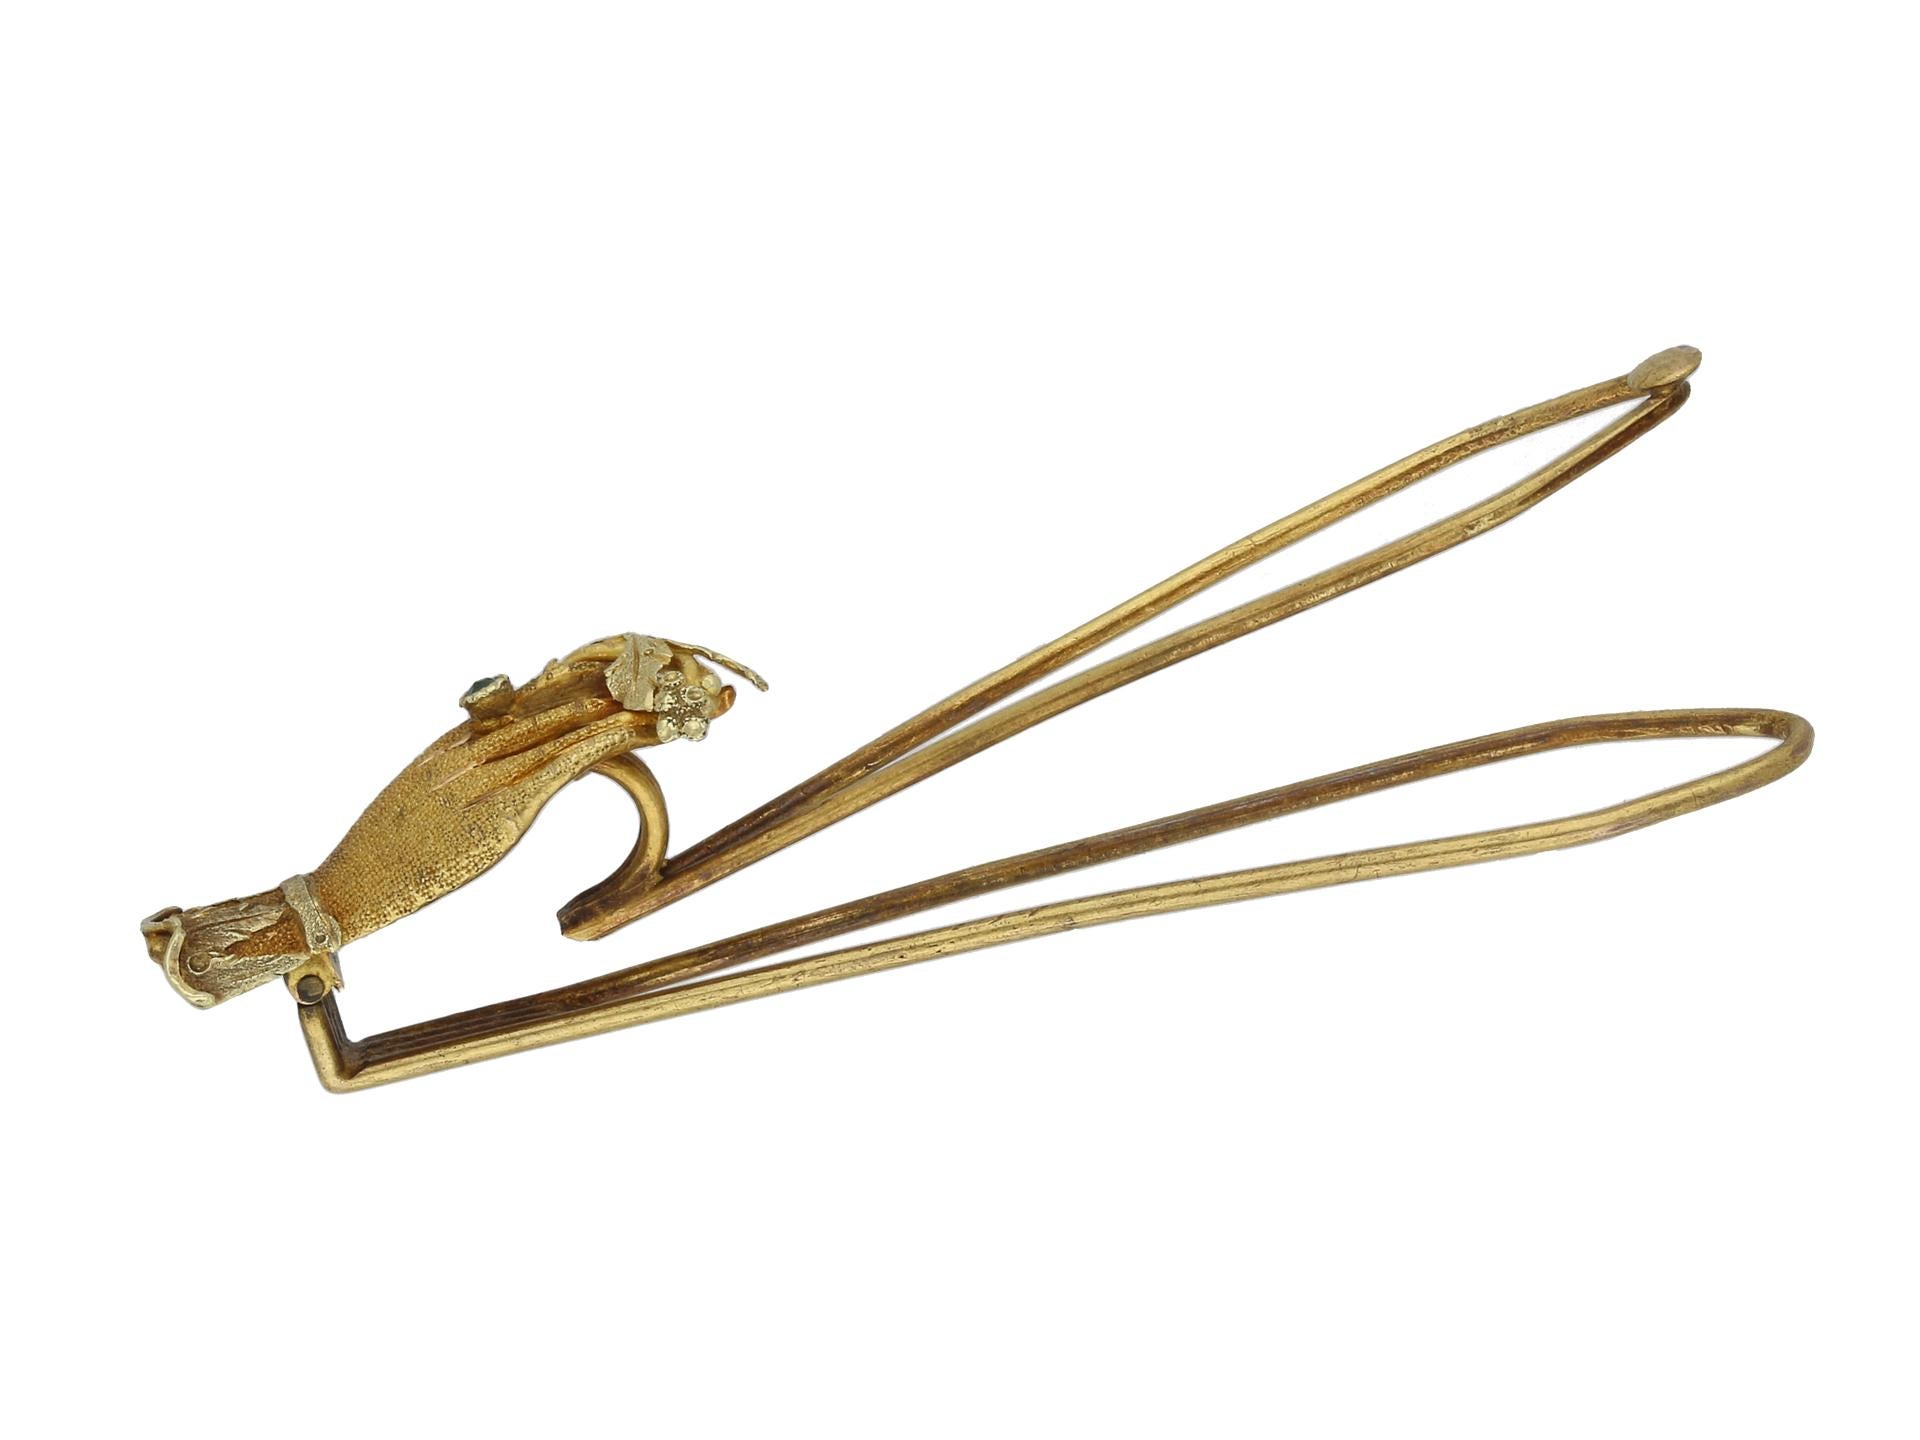 Georgian hair slide or scarf slide. A yellow gold hair slide, featuring a hand with ruffled cuff holding a sprig of leaves and berries between the index and forefinger, and wearing a ring set with a cushion shape old cut emerald with an approximate